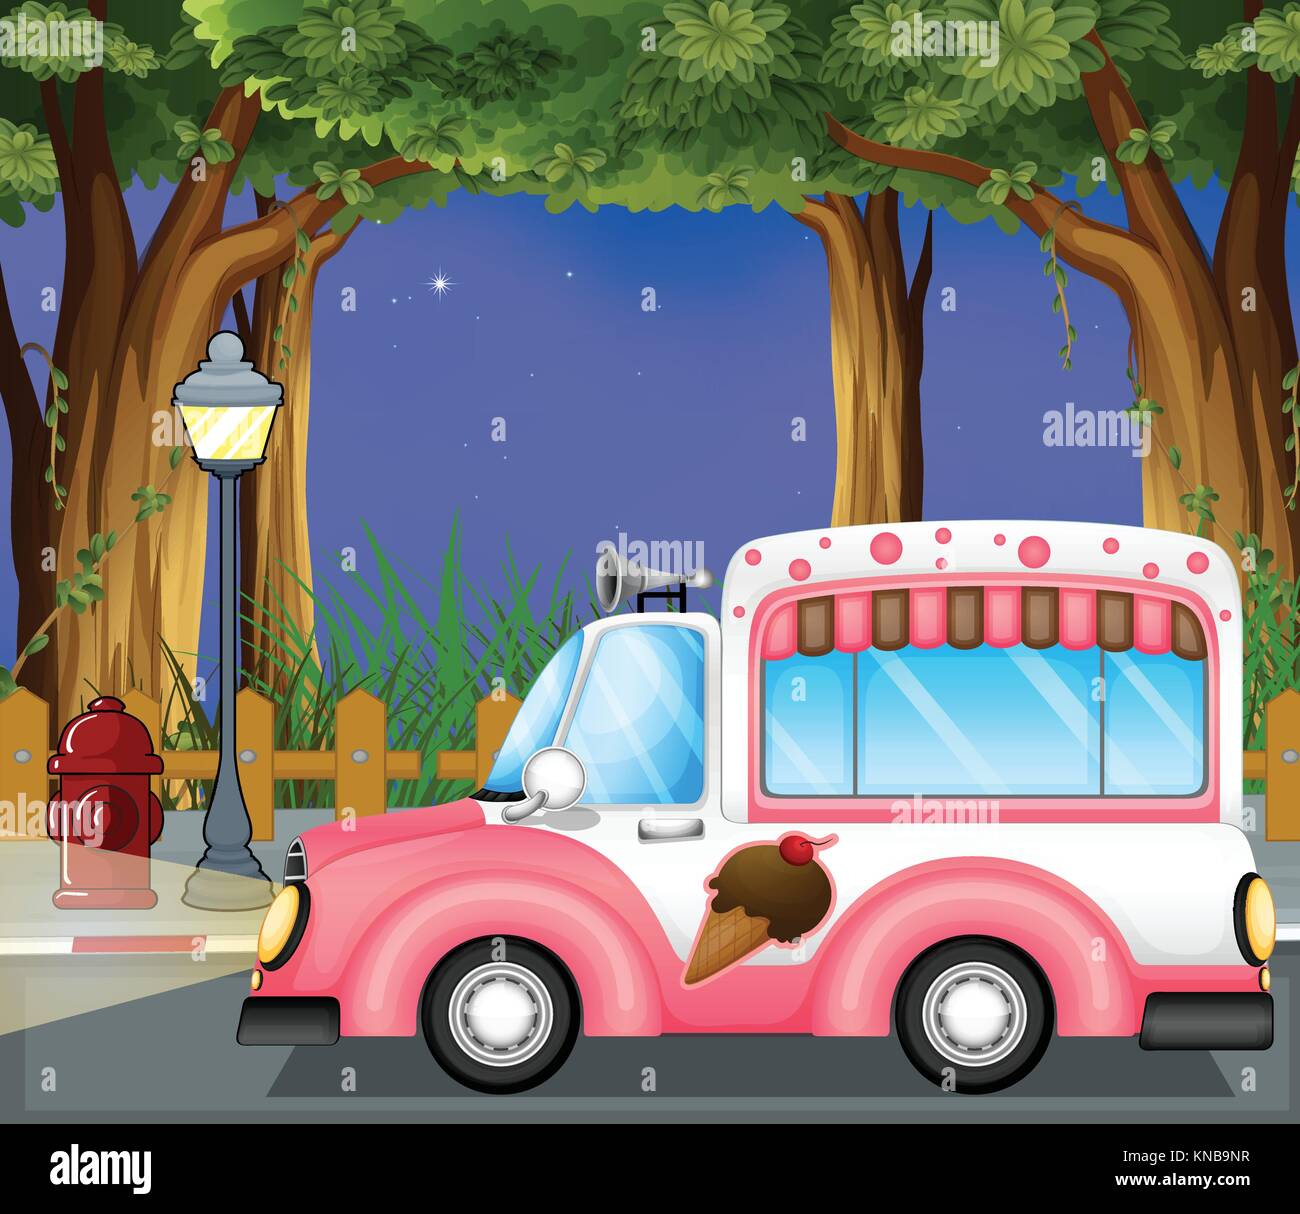 Illustration of a pink ice cream car in the street Stock Vector